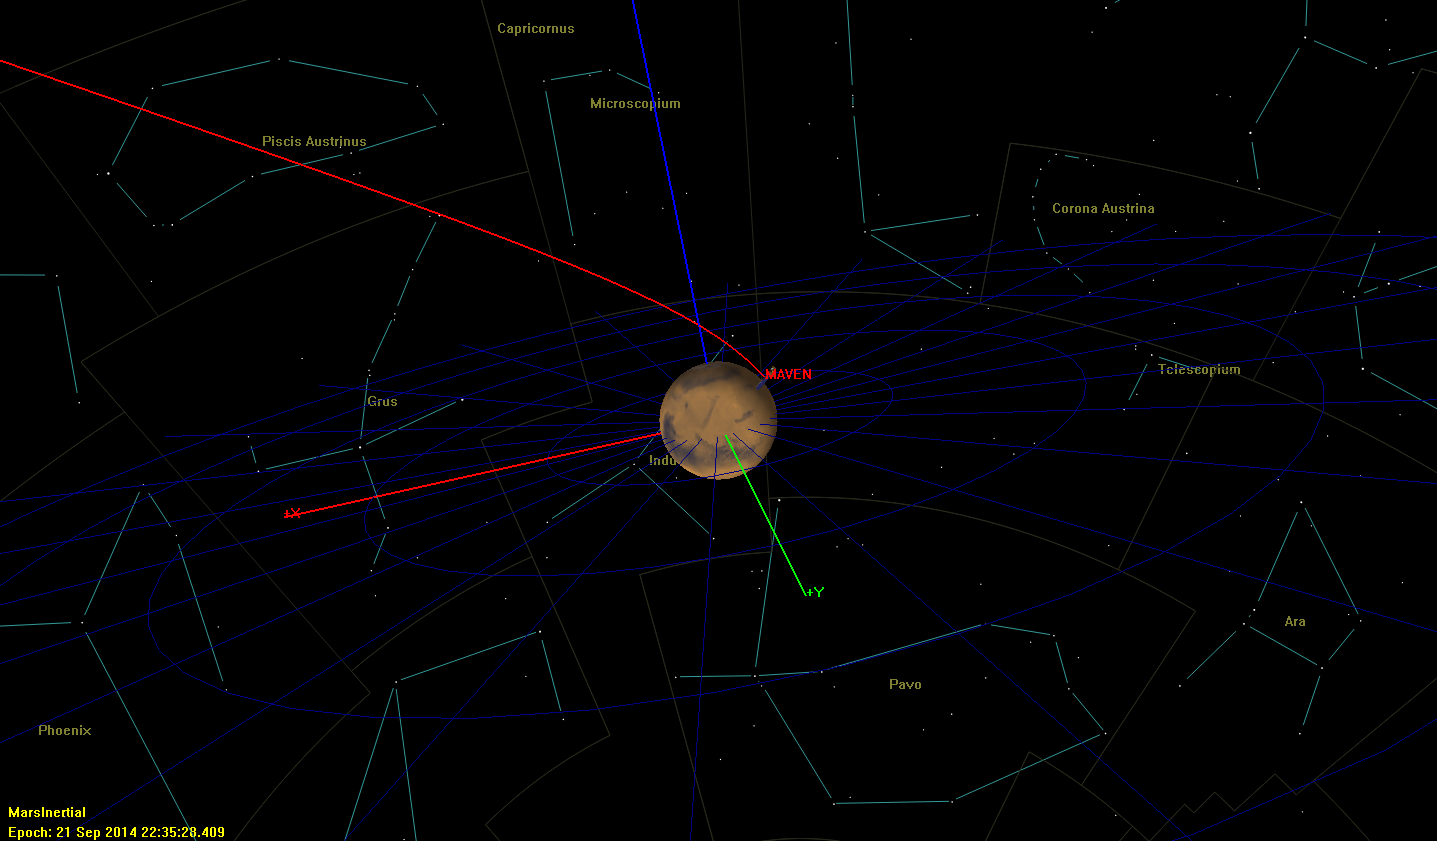 3D View of approach hyperbolic trajectory. MAVEN stopped at periapsis (MarsView)